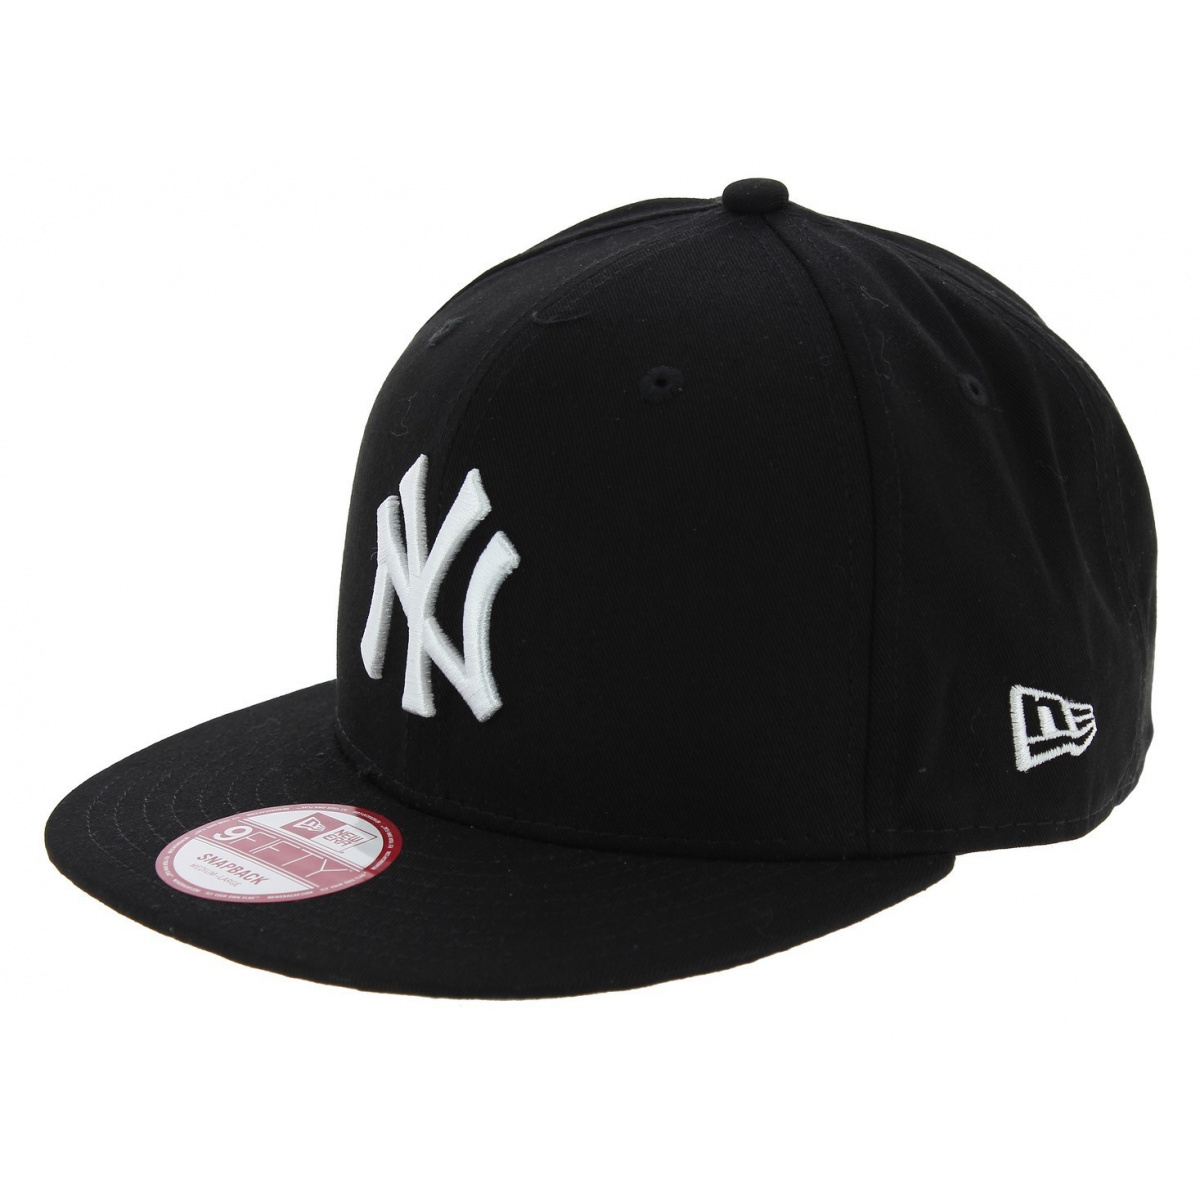 Homme - New Era Casquettes - Size? France